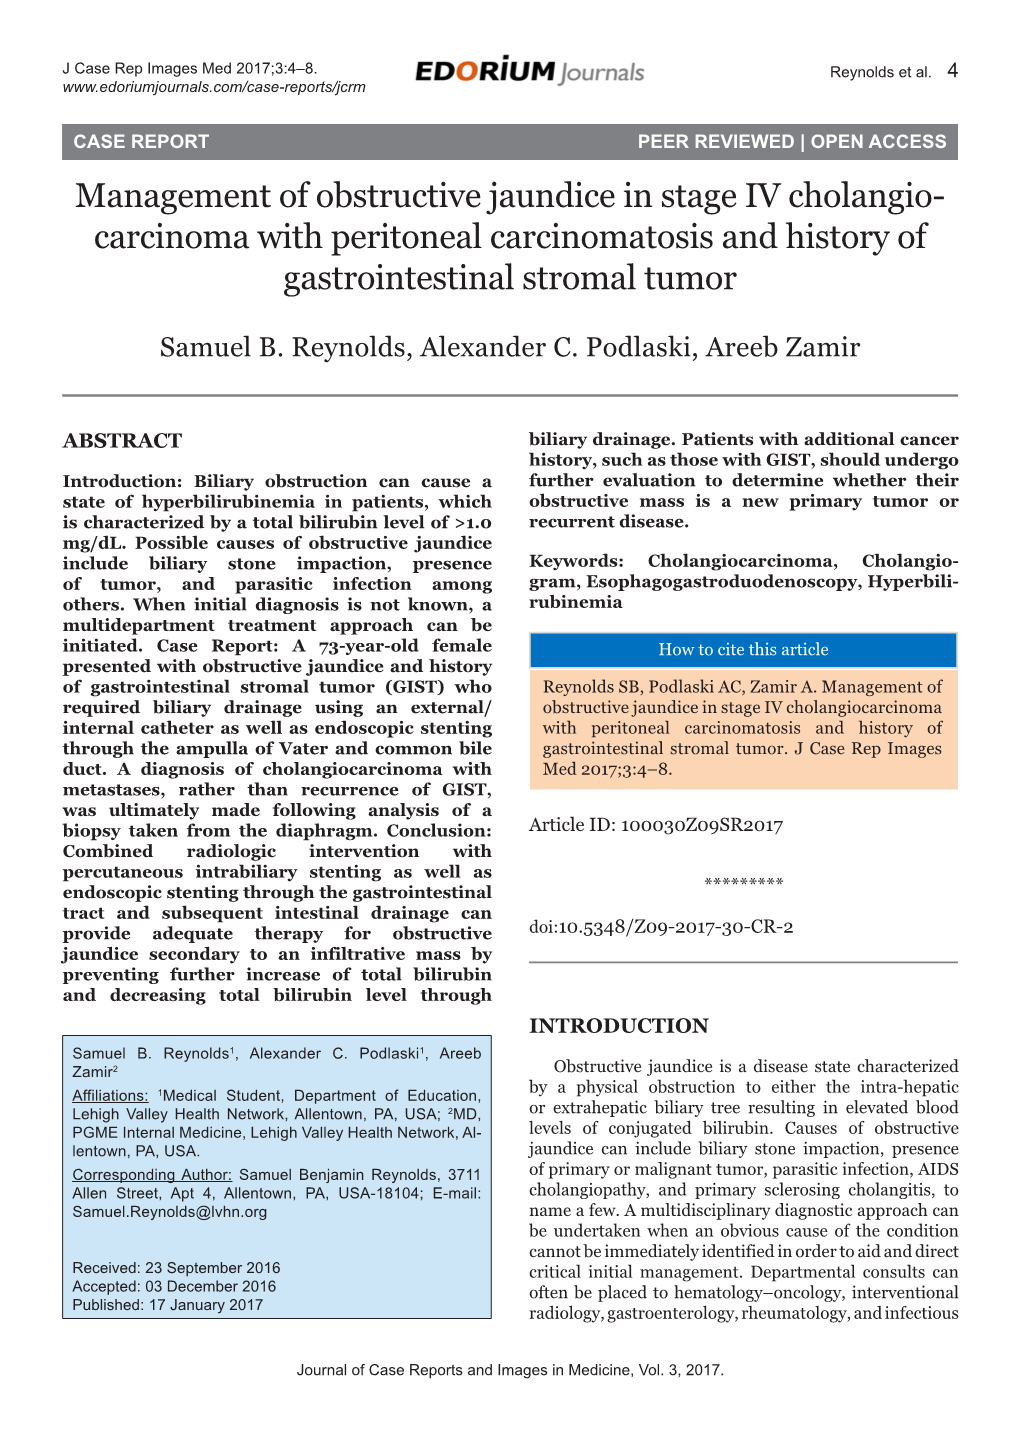 Management of Obstructive Jaundice in Stage IV Cholangio- Carcinoma with Peritoneal Carcinomatosis and History of Gastrointestinal Stromal Tumor